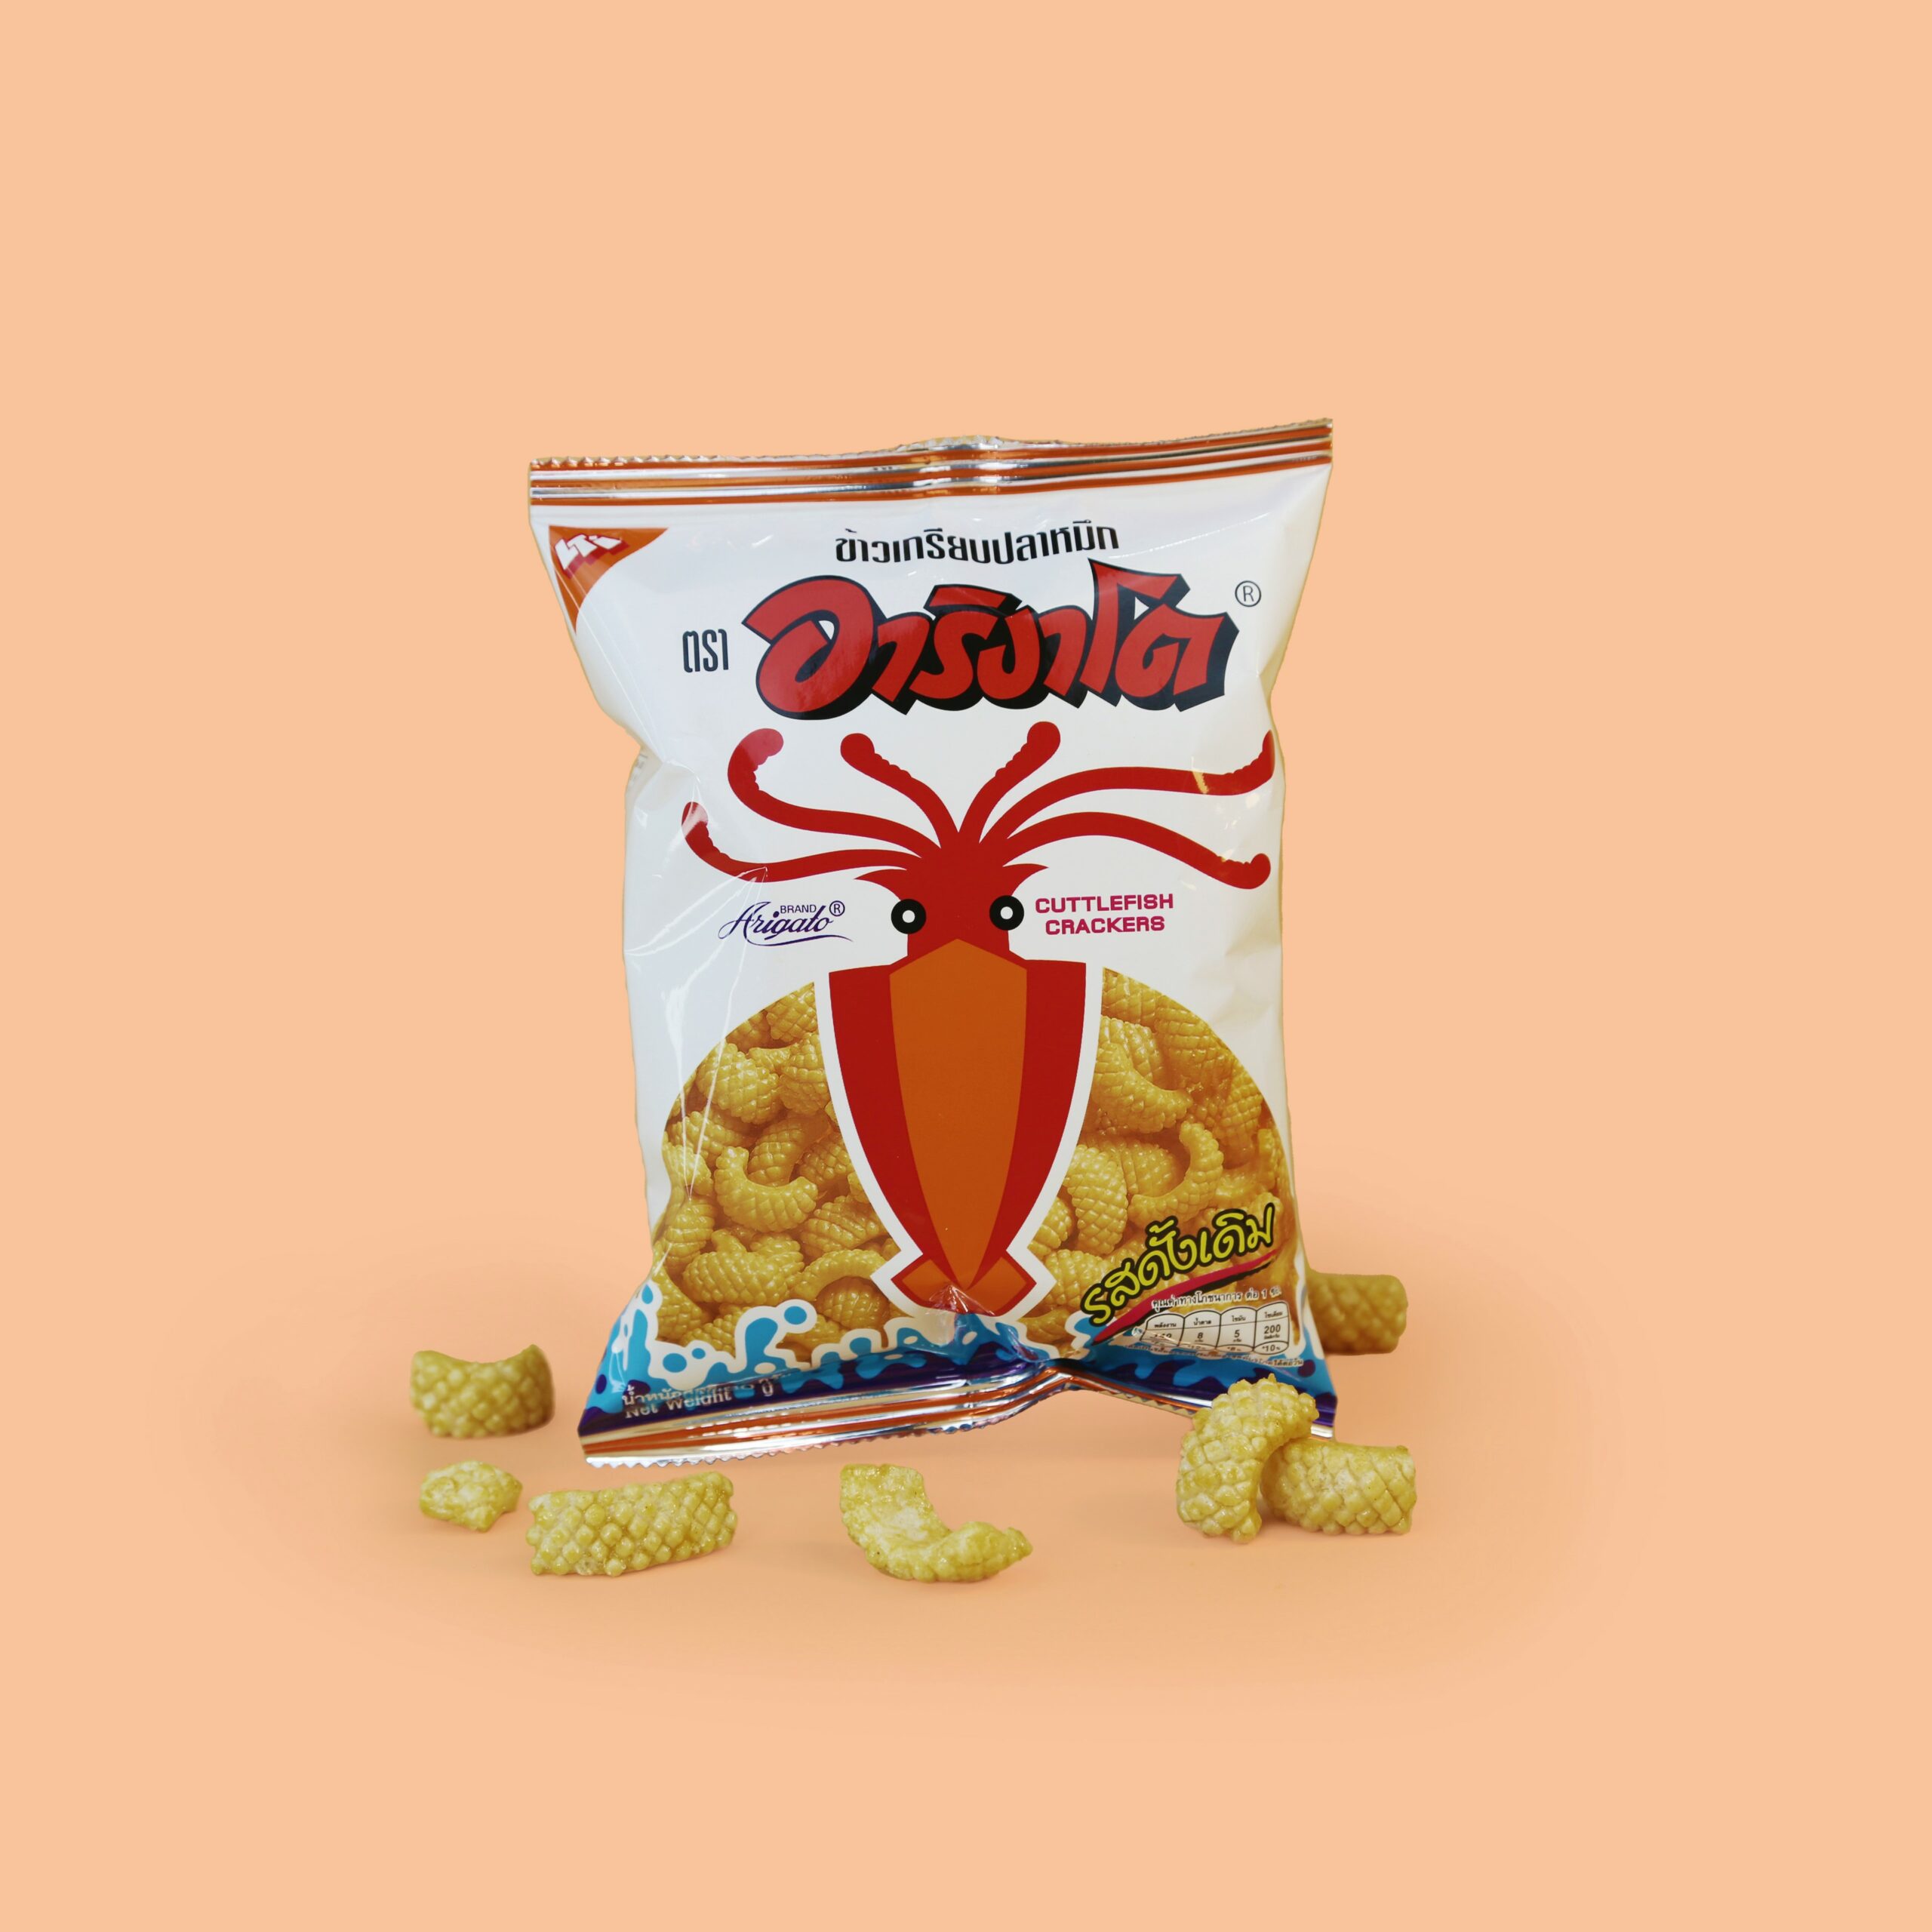 Arigato squid flavored crispy Thai snack. Made in Thailand and included in Heap Brand Thai snack box shipped from Thailand